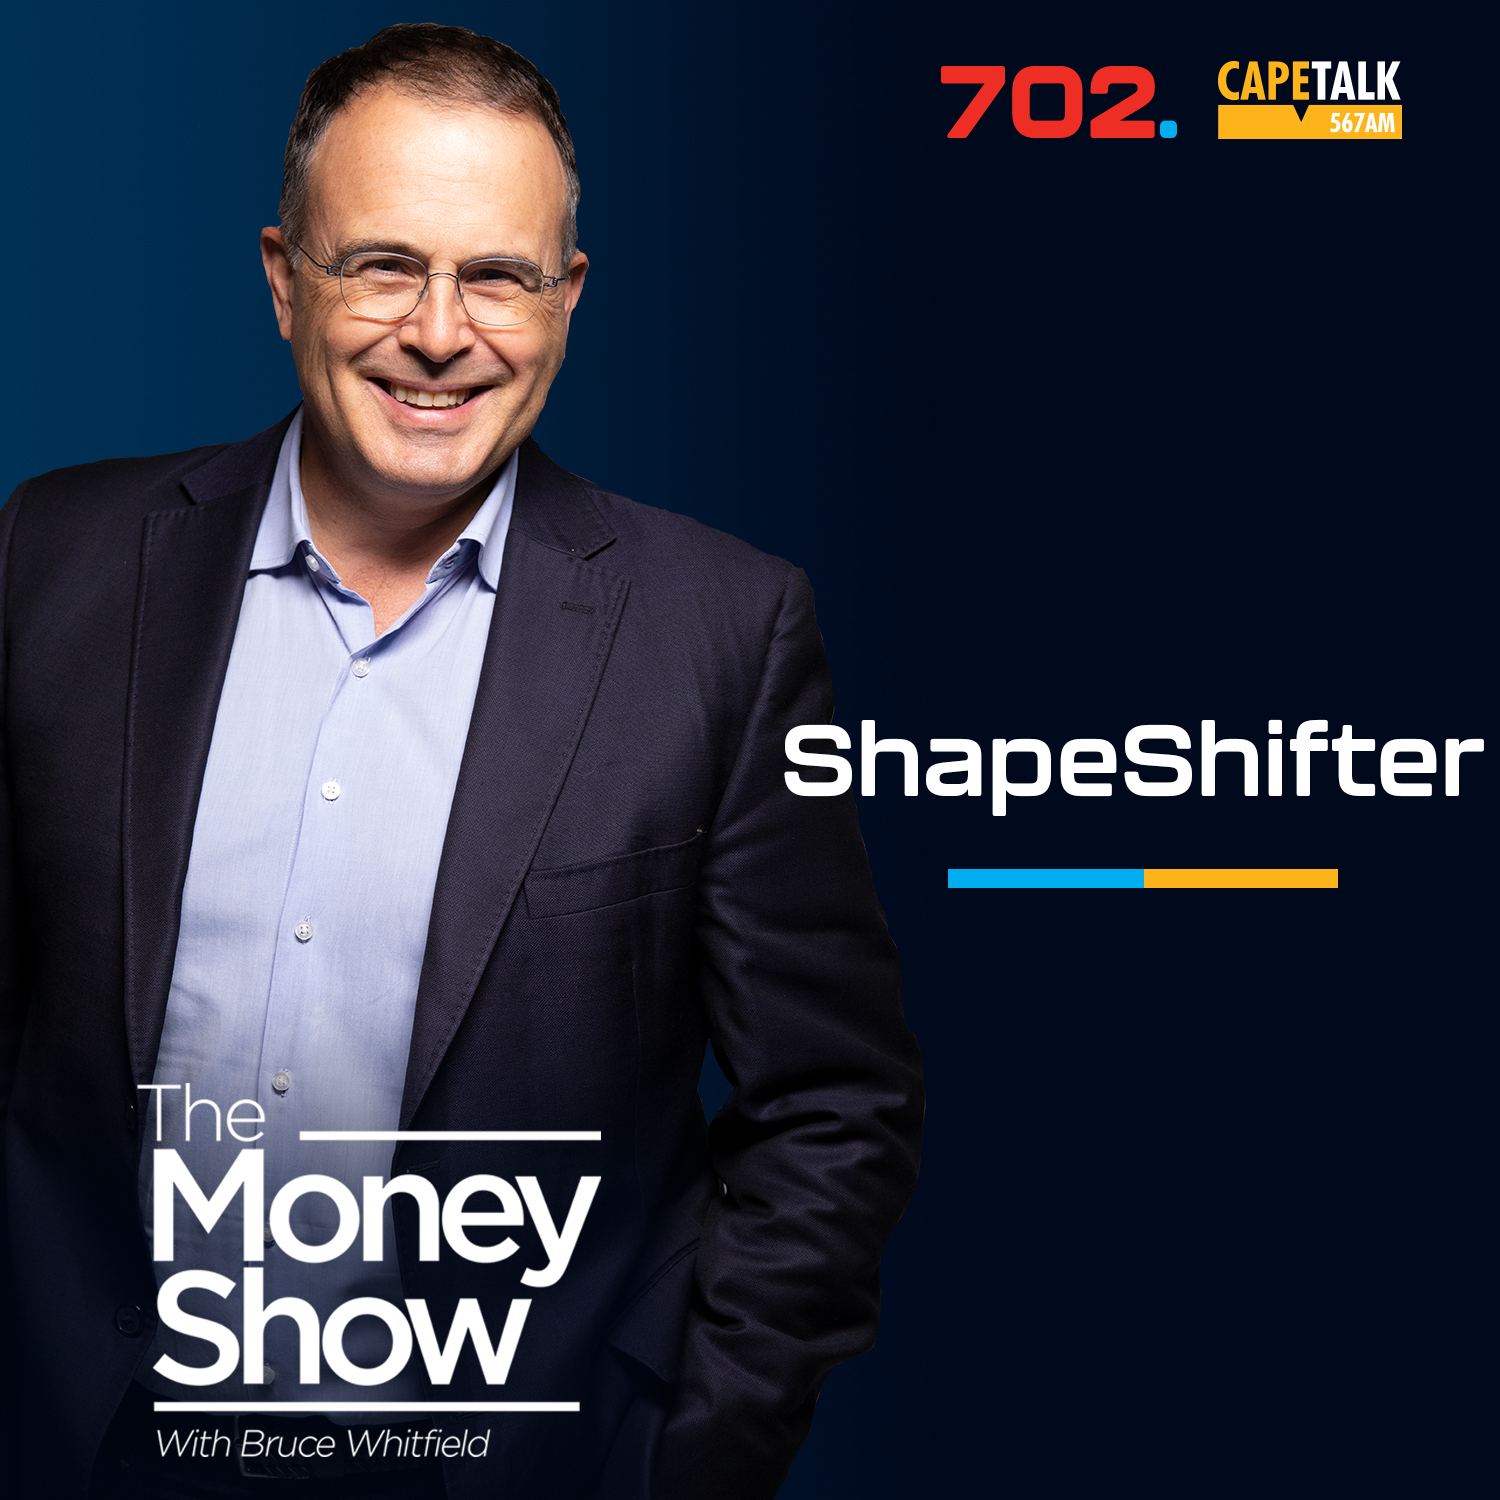 Shapeshifter -  Emrie Brown, CEO of RMB